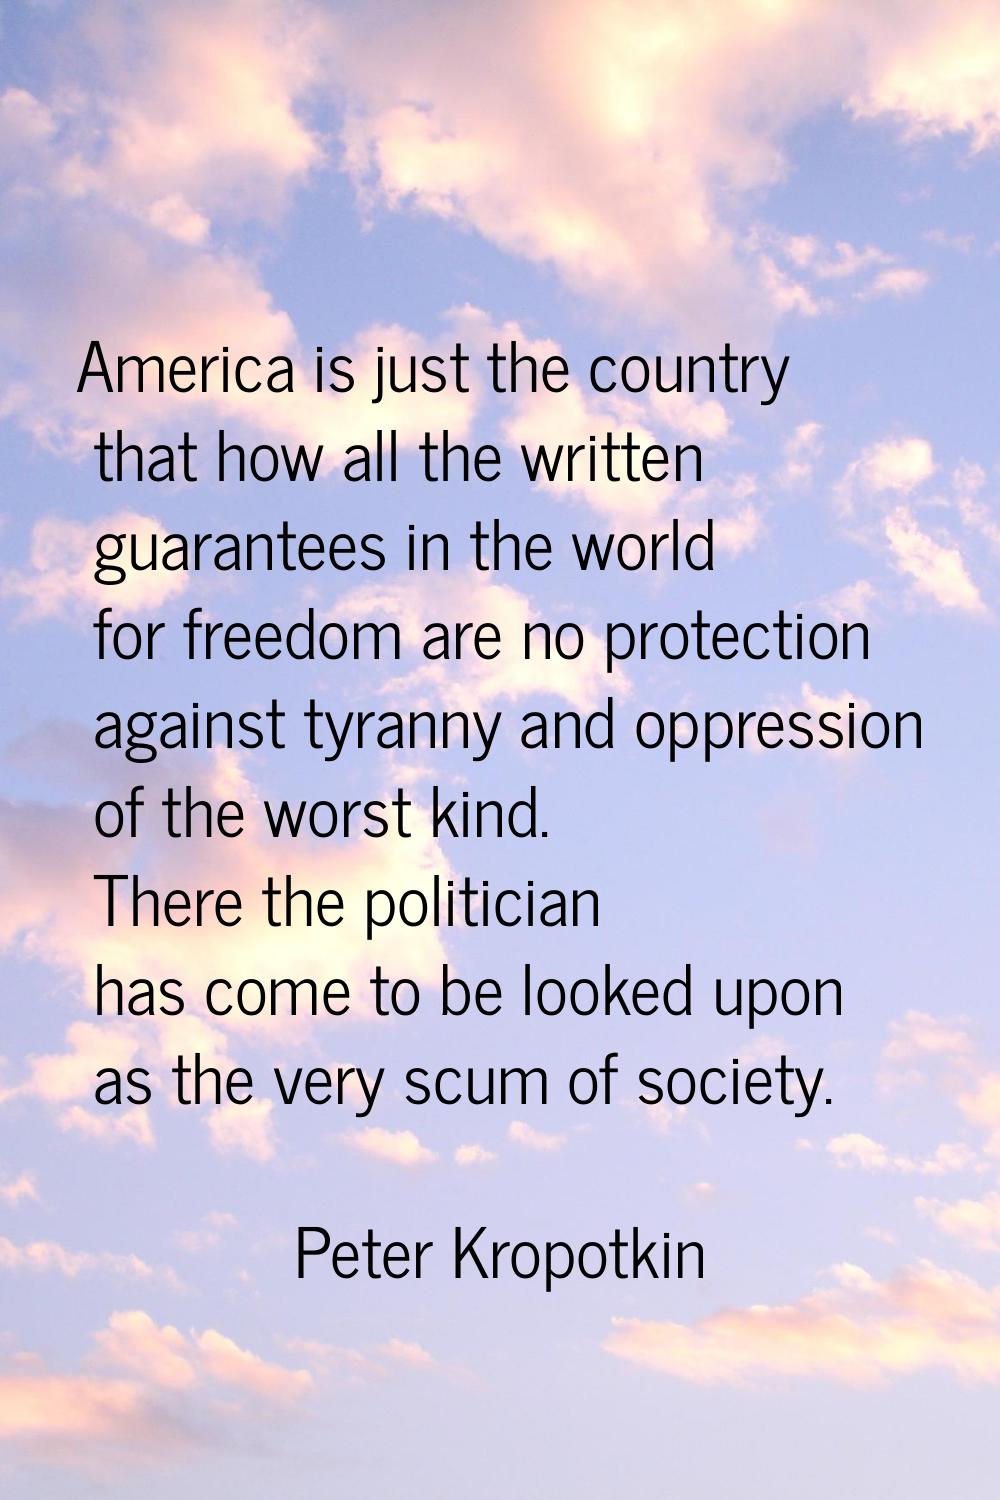 America is just the country that how all the written guarantees in the world for freedom are no pro